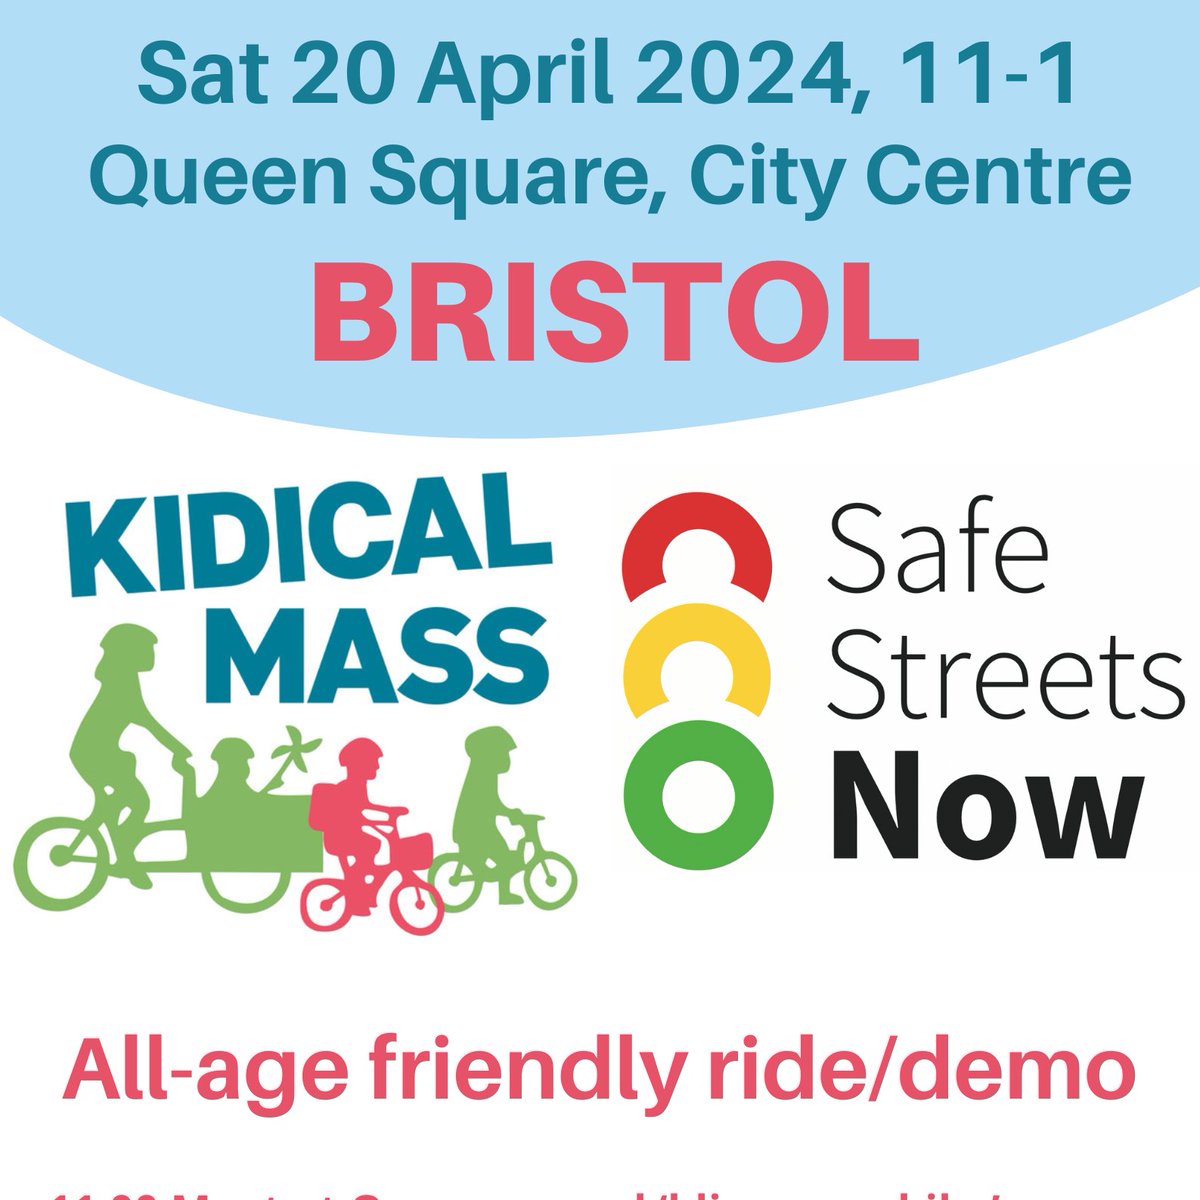 Do you want safer streets for children (and everyone)? Want politicians to act on this? If so, join the #SafeStreetsNow day of action on 20th April. In Bristol we are combining this with a #KidicalMass bike ride, making children seen and heard in their city! Details/links below.